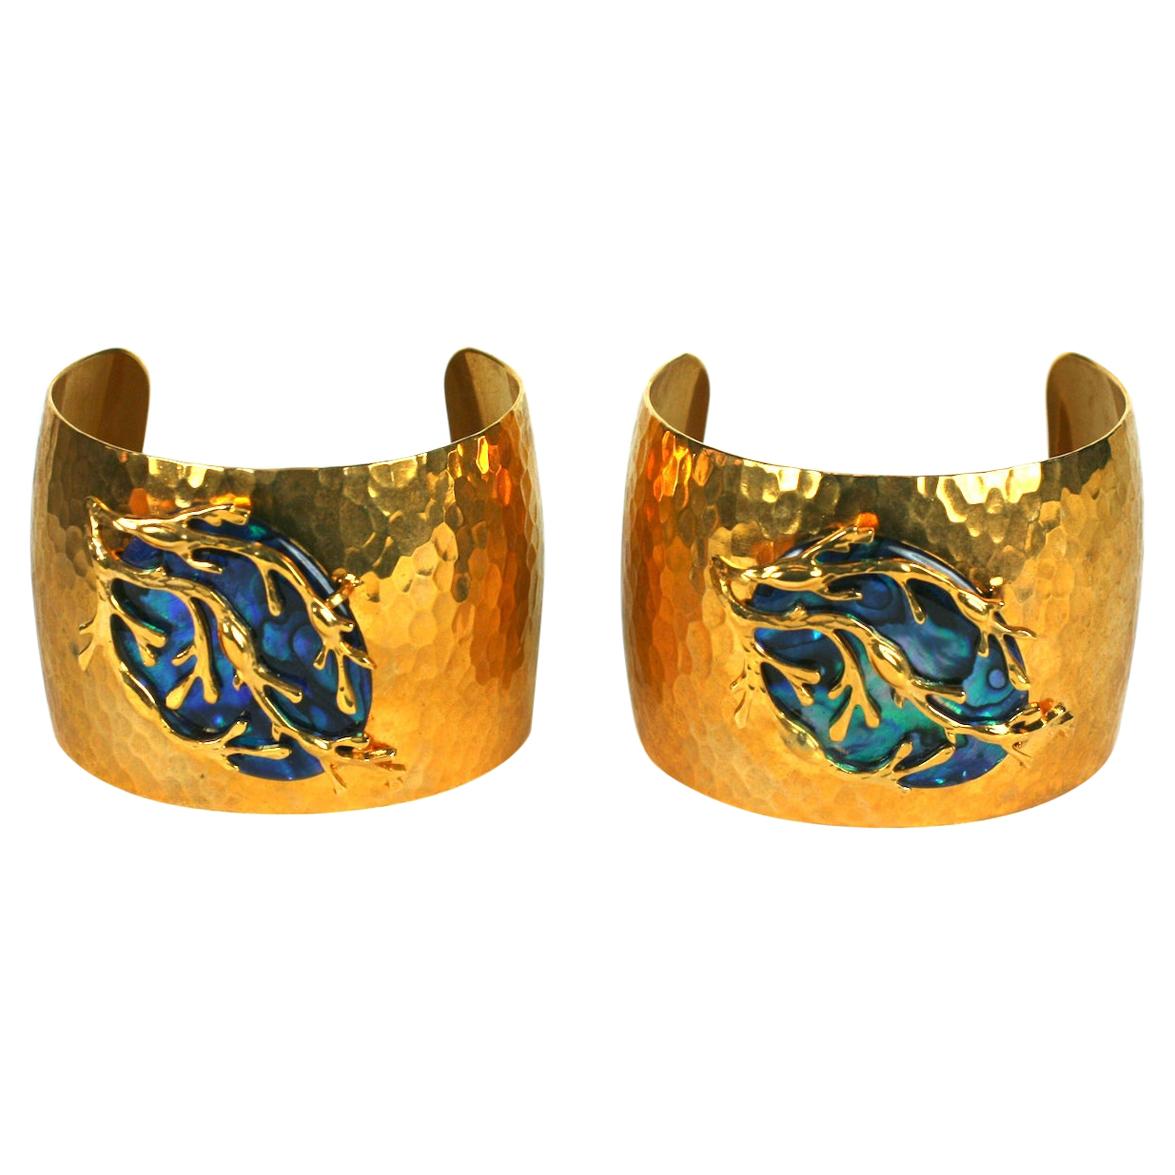 Mother of Pearl Seaweed Cuffs, MWLC